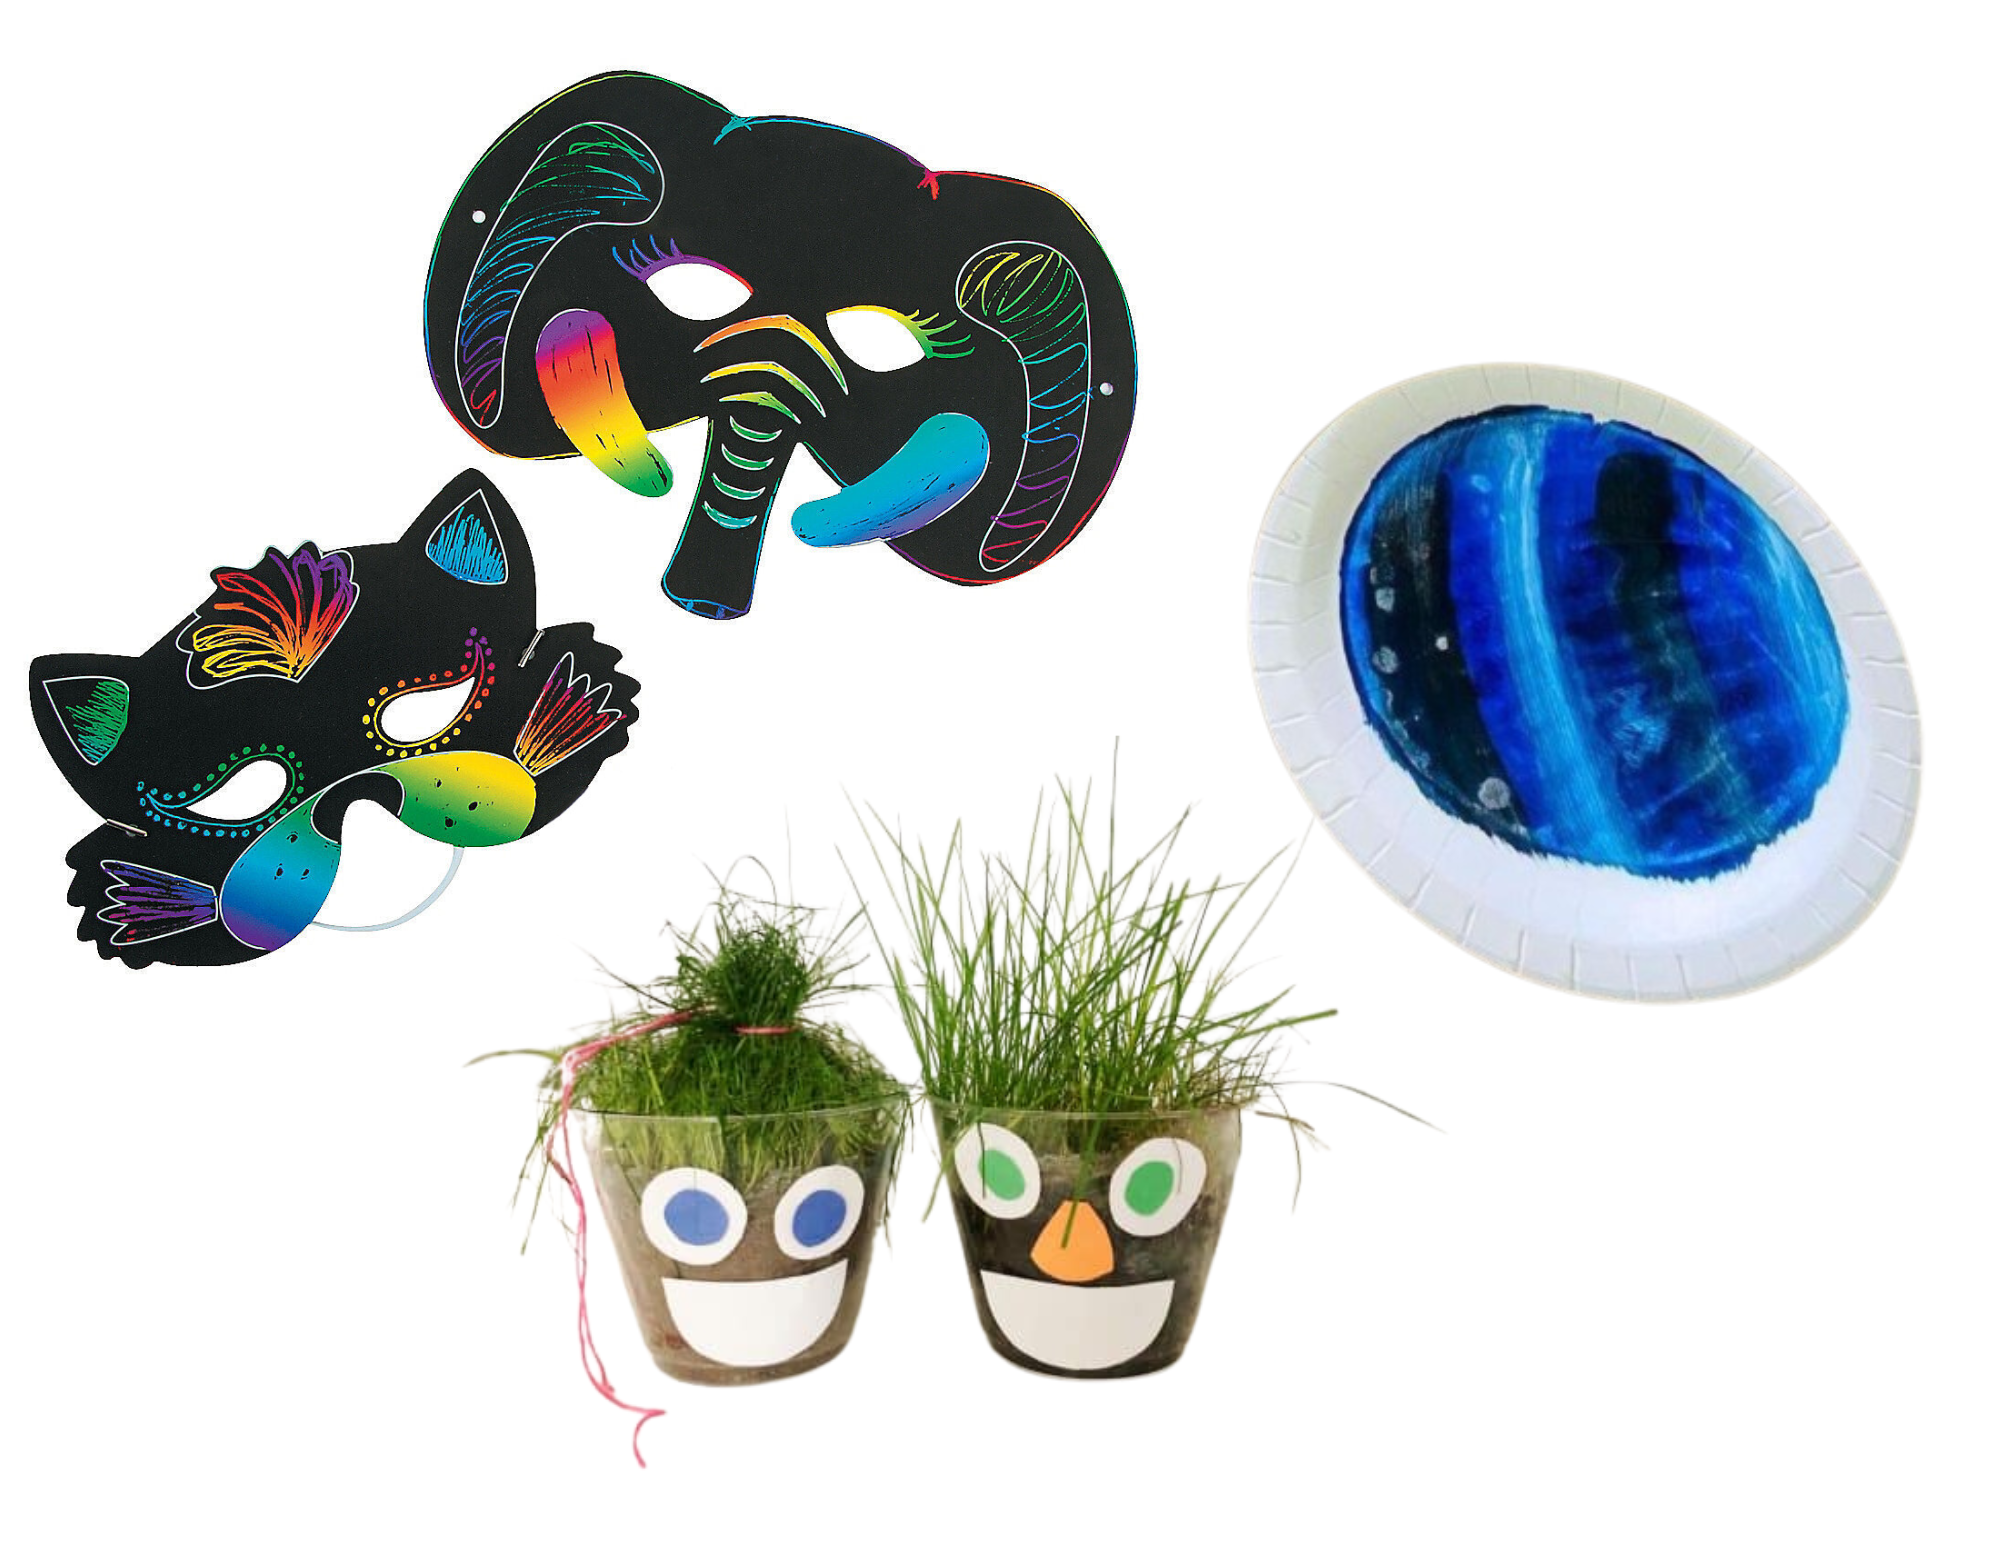 image of masks, paper plate craft, and grass in small pots